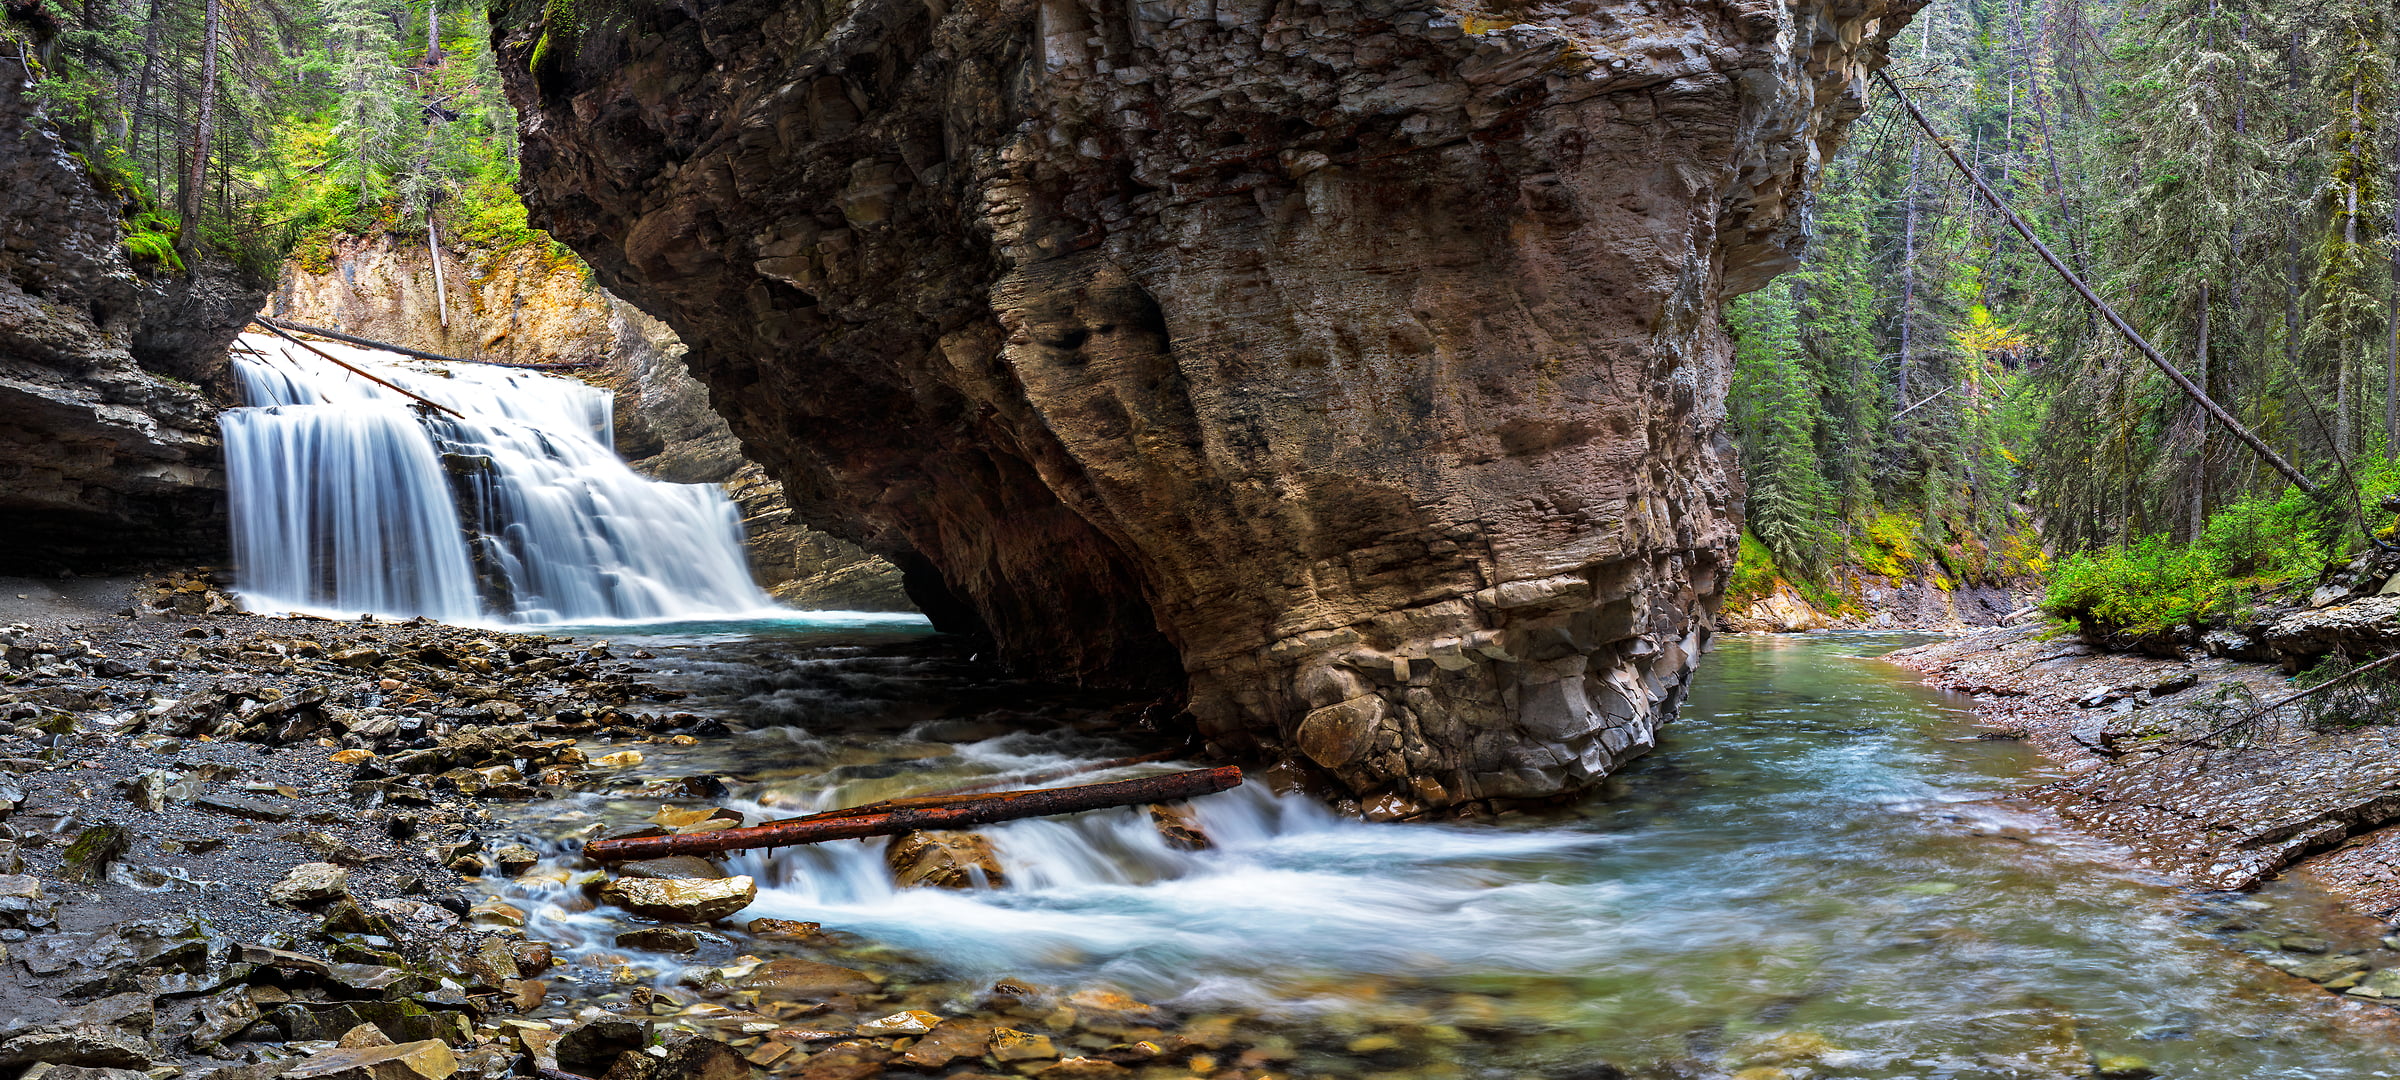 310 megapixels! A very high resolution, large-format VAST photo print of a waterfall, stream, rocks, and forest in the woods; fine art nature photo created by Chris Collacott in Banff National Park, Alberta, Canada.